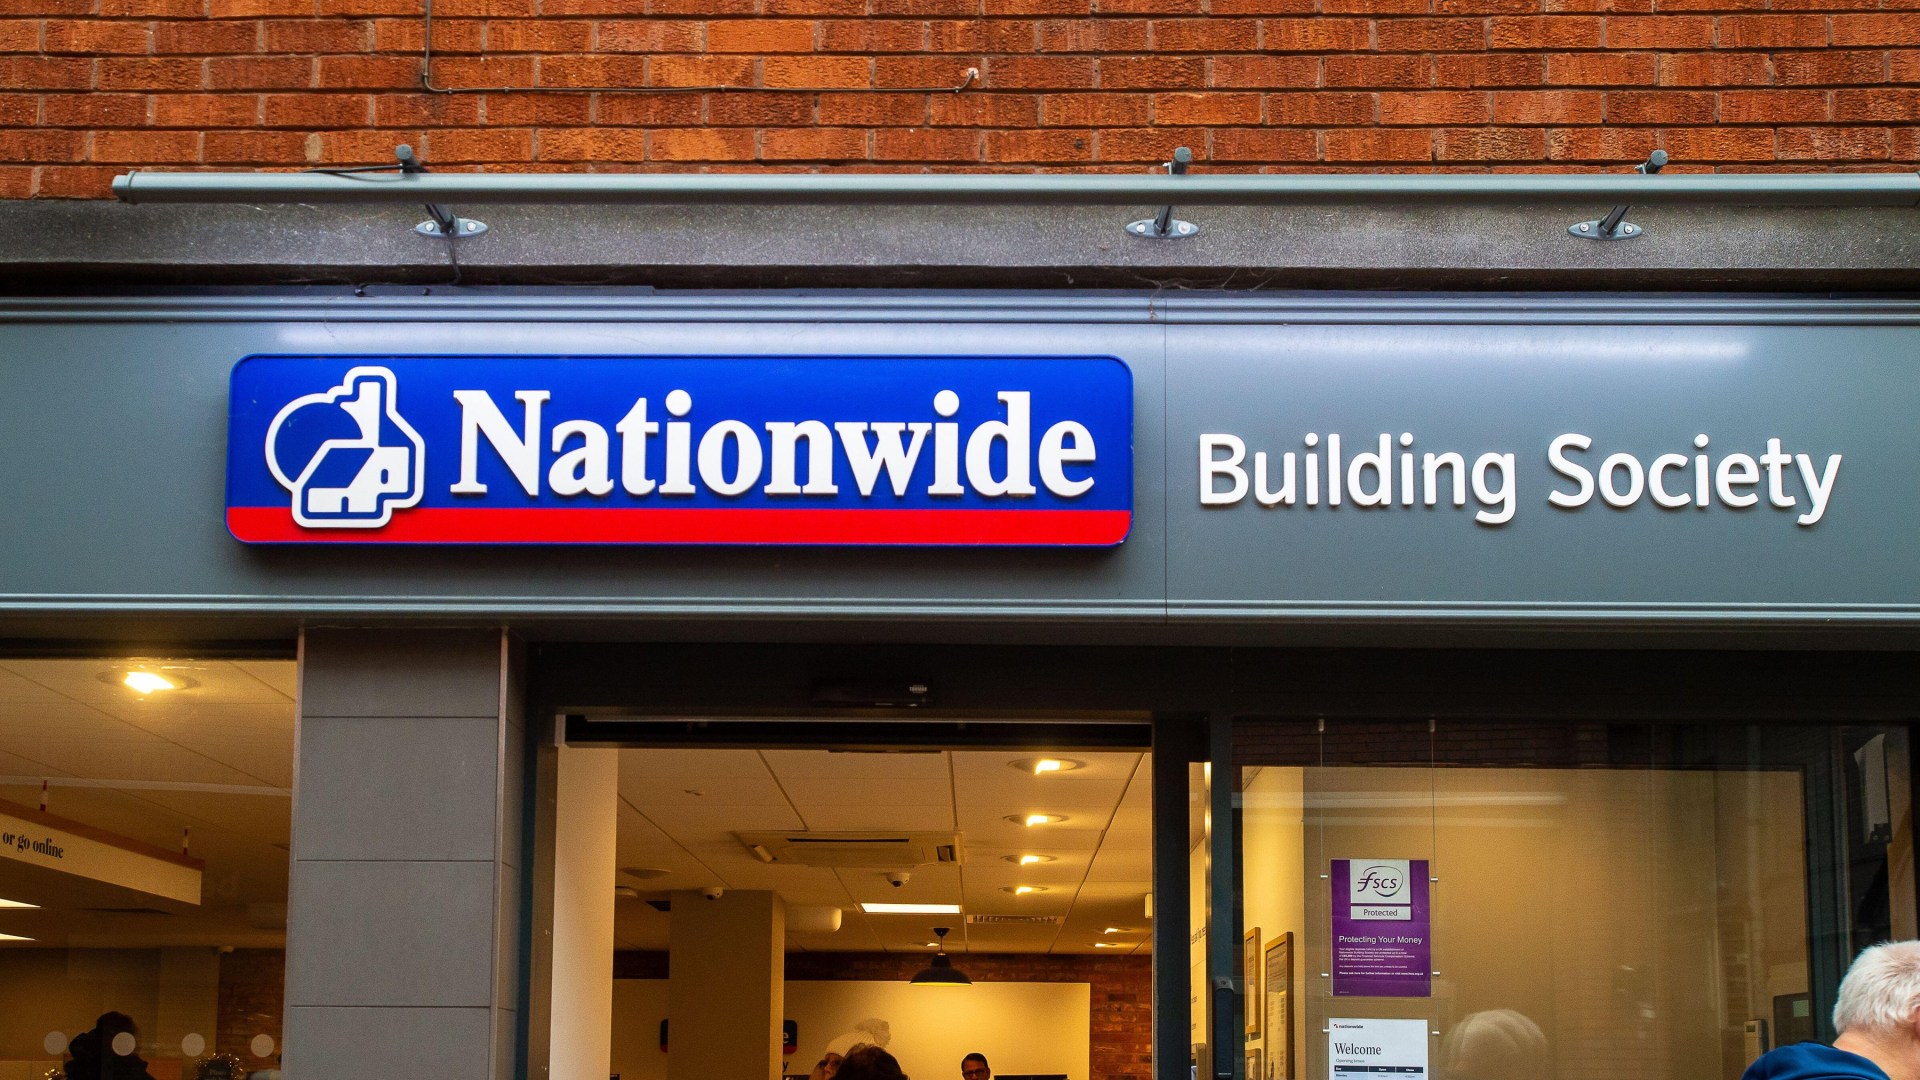 Nationwide online banking and app down leaving thousands of customers unable to access accounts